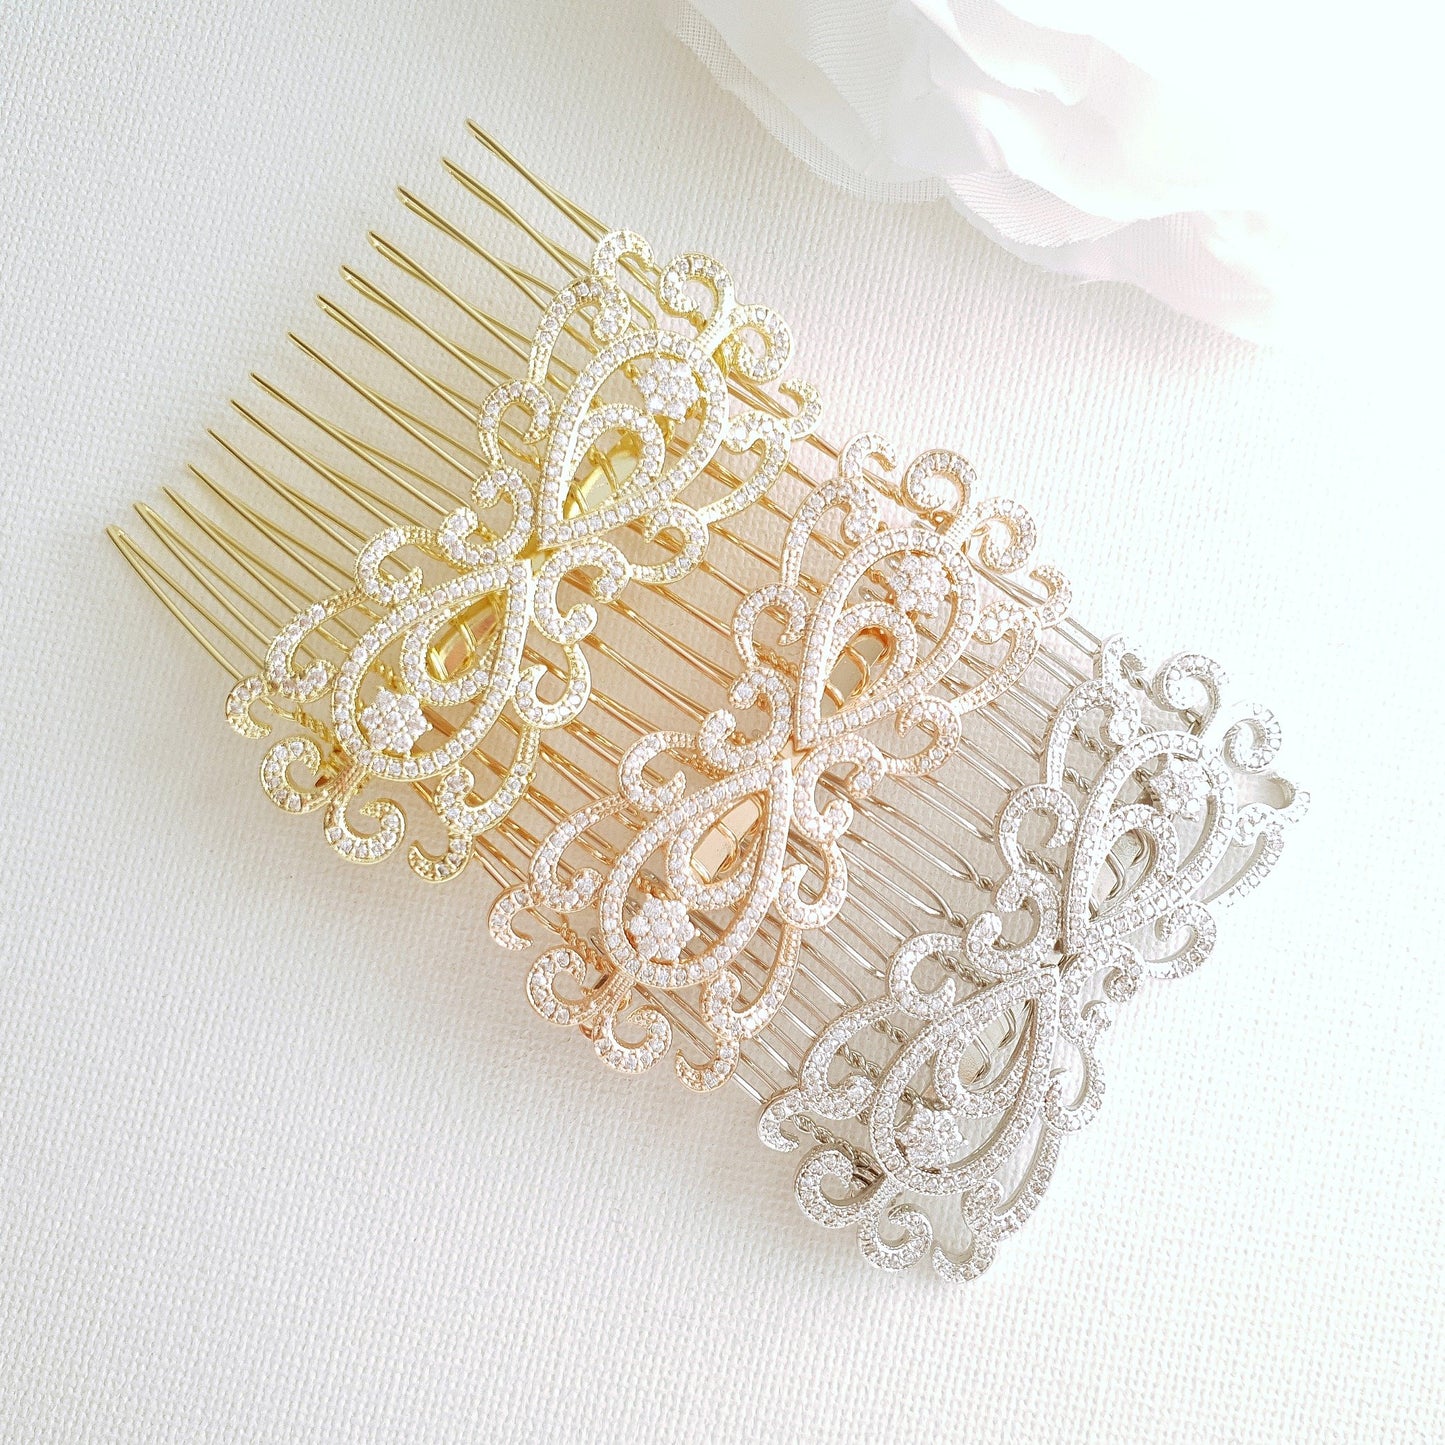 Small Art Deco Bridal Hair Comb-Arletty - PoetryDesigns